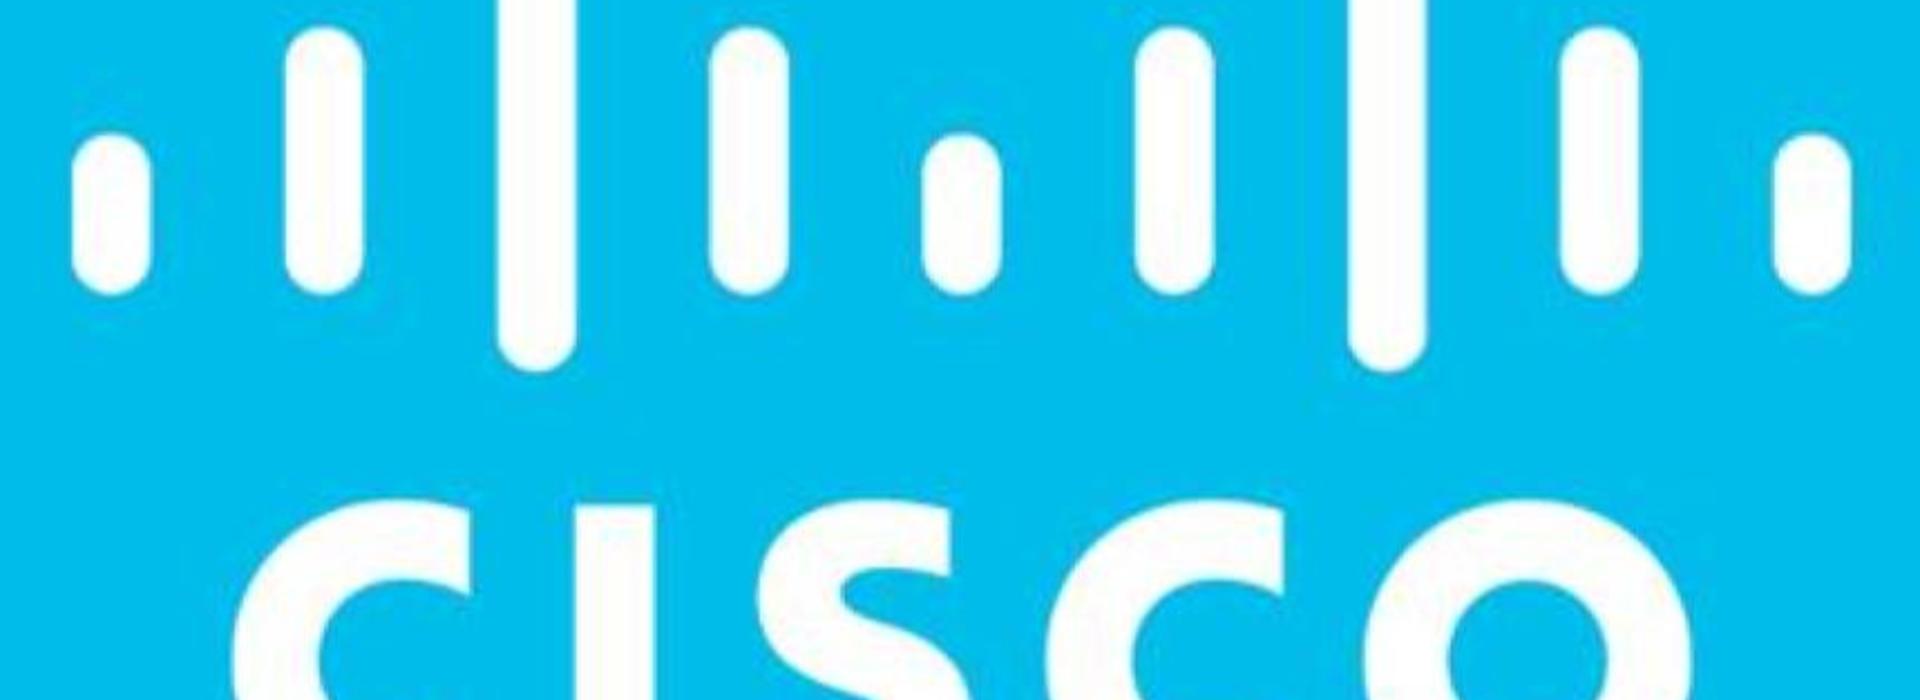 Cisco Systems logo in white on a blue background